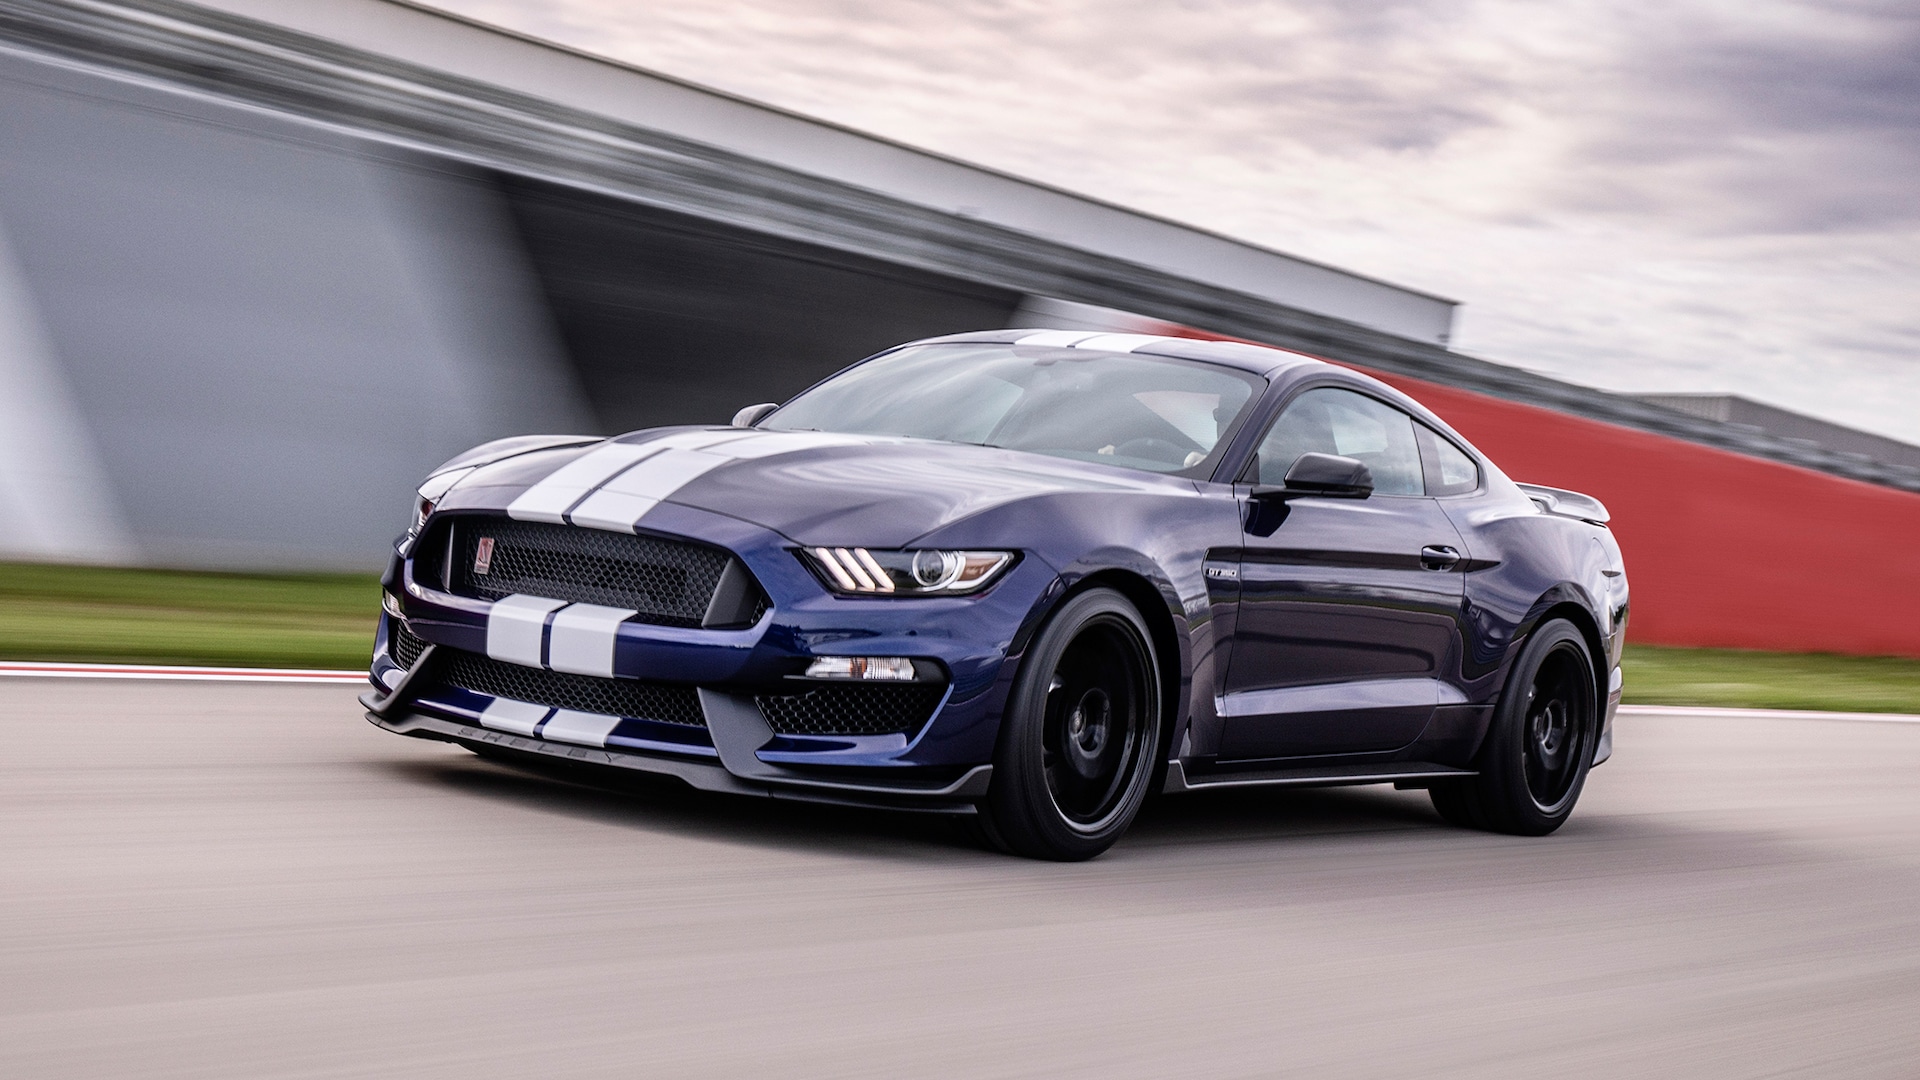 2019 Ford Mustang Shelby GT350 First Drive: More Accessible Performance